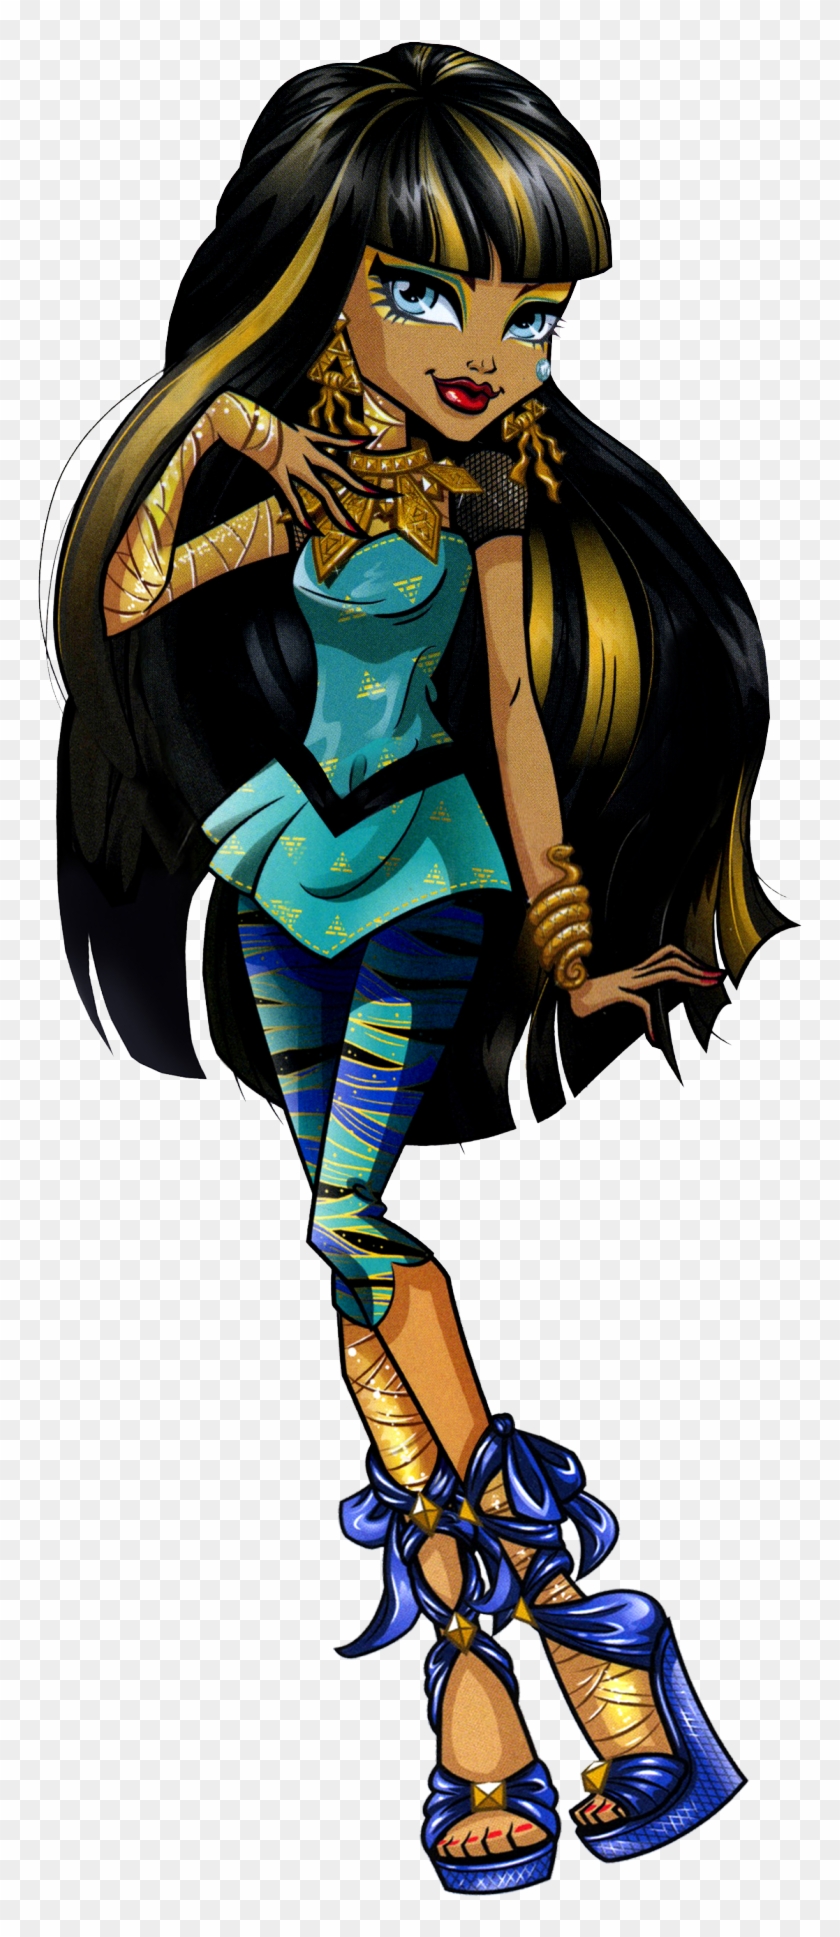 Cleo De Nile Cleo De Nile Is The Daughter Of The Mummy - Welcome Monster High Cleo De Nile Art #1189114